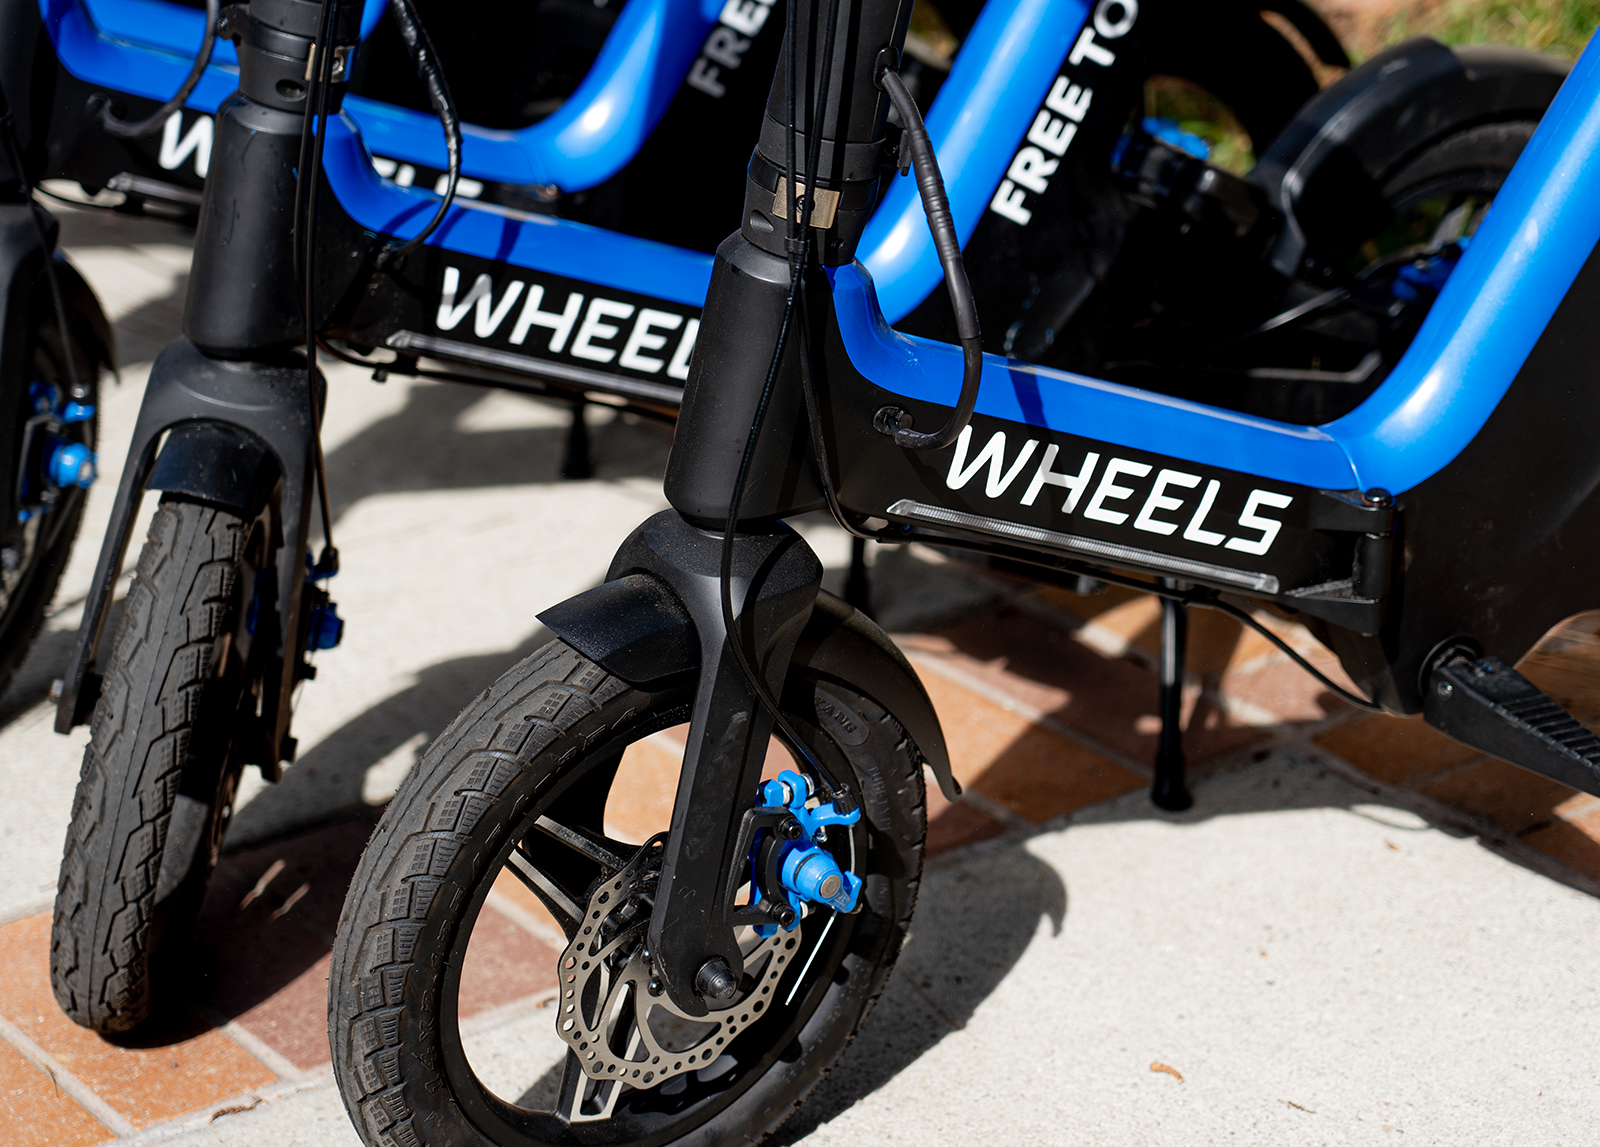 Wheels Rolls Out New Electric Bike Model With Attached Helmet